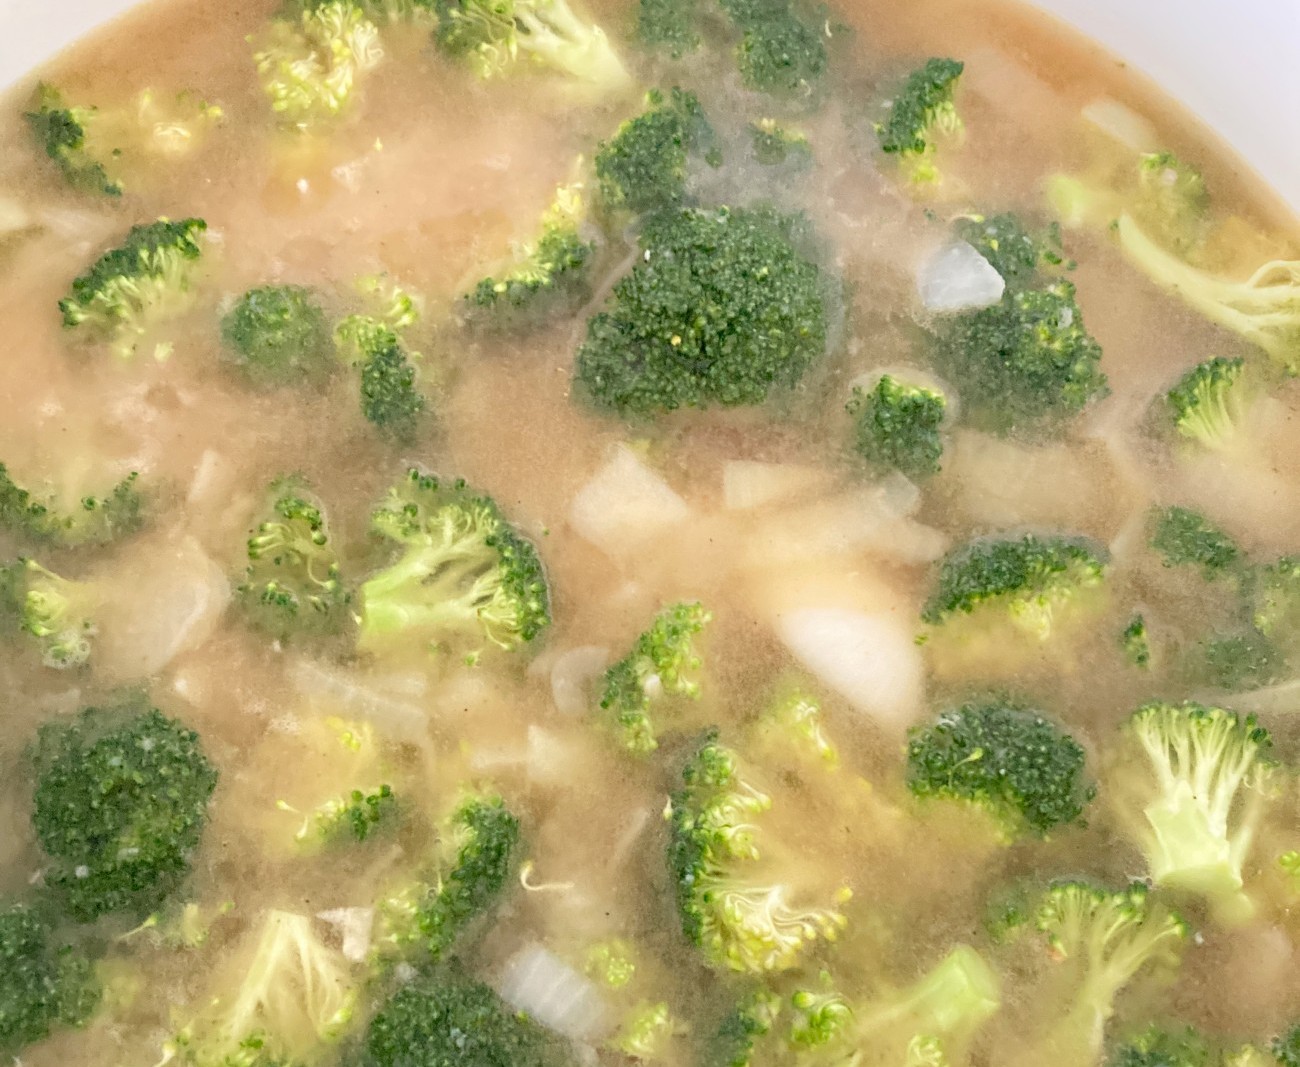 Add broth and first half of chopped broccoli to pan. Raise heat to high until boiling then reduce heat to medium-low and simmer for 8-10 minutes.